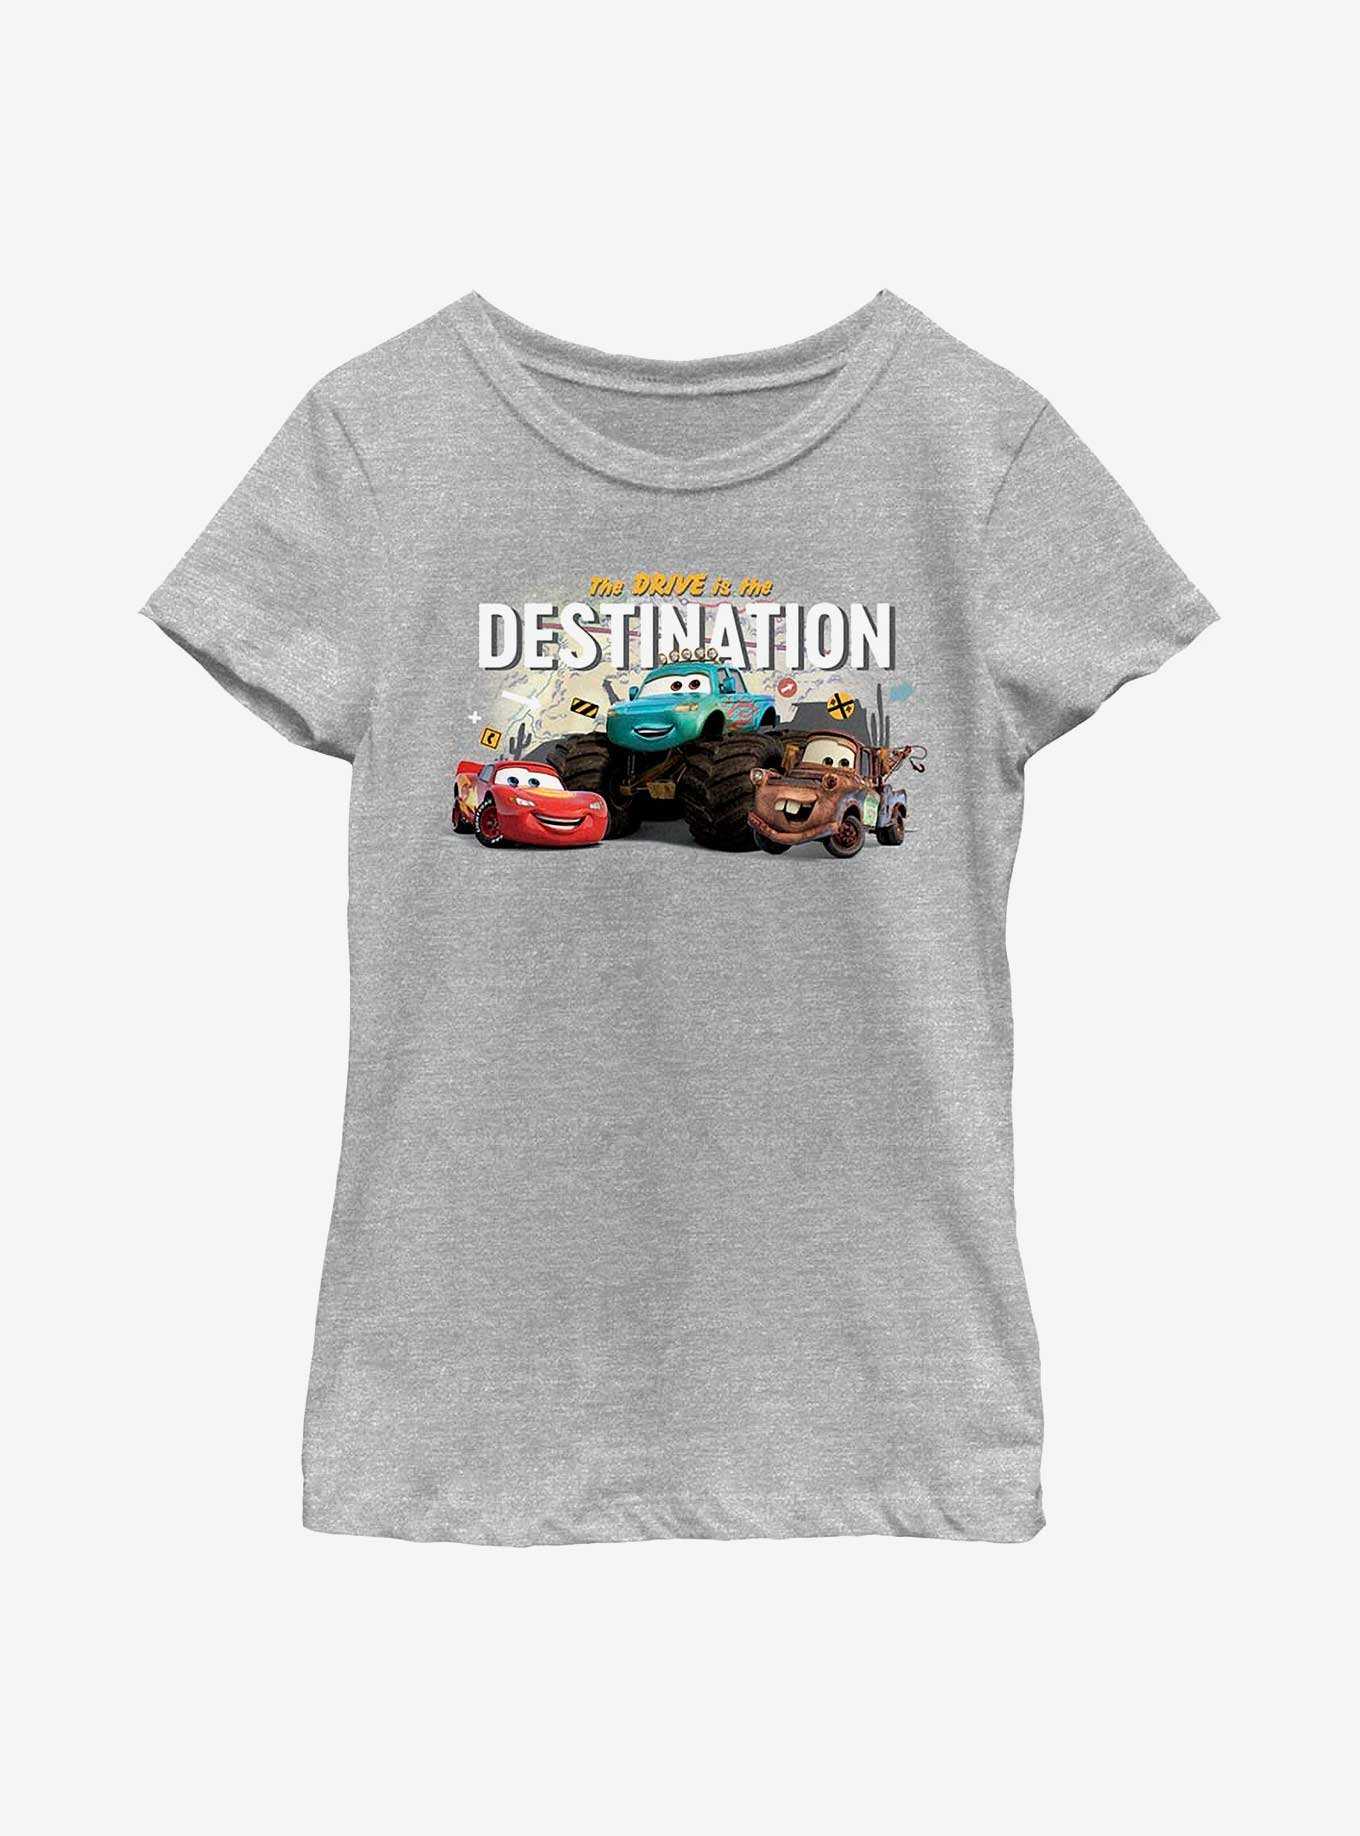 Disney Pixar Cars The Drive Is The Destination Youth Girls T-Shirt, , hi-res